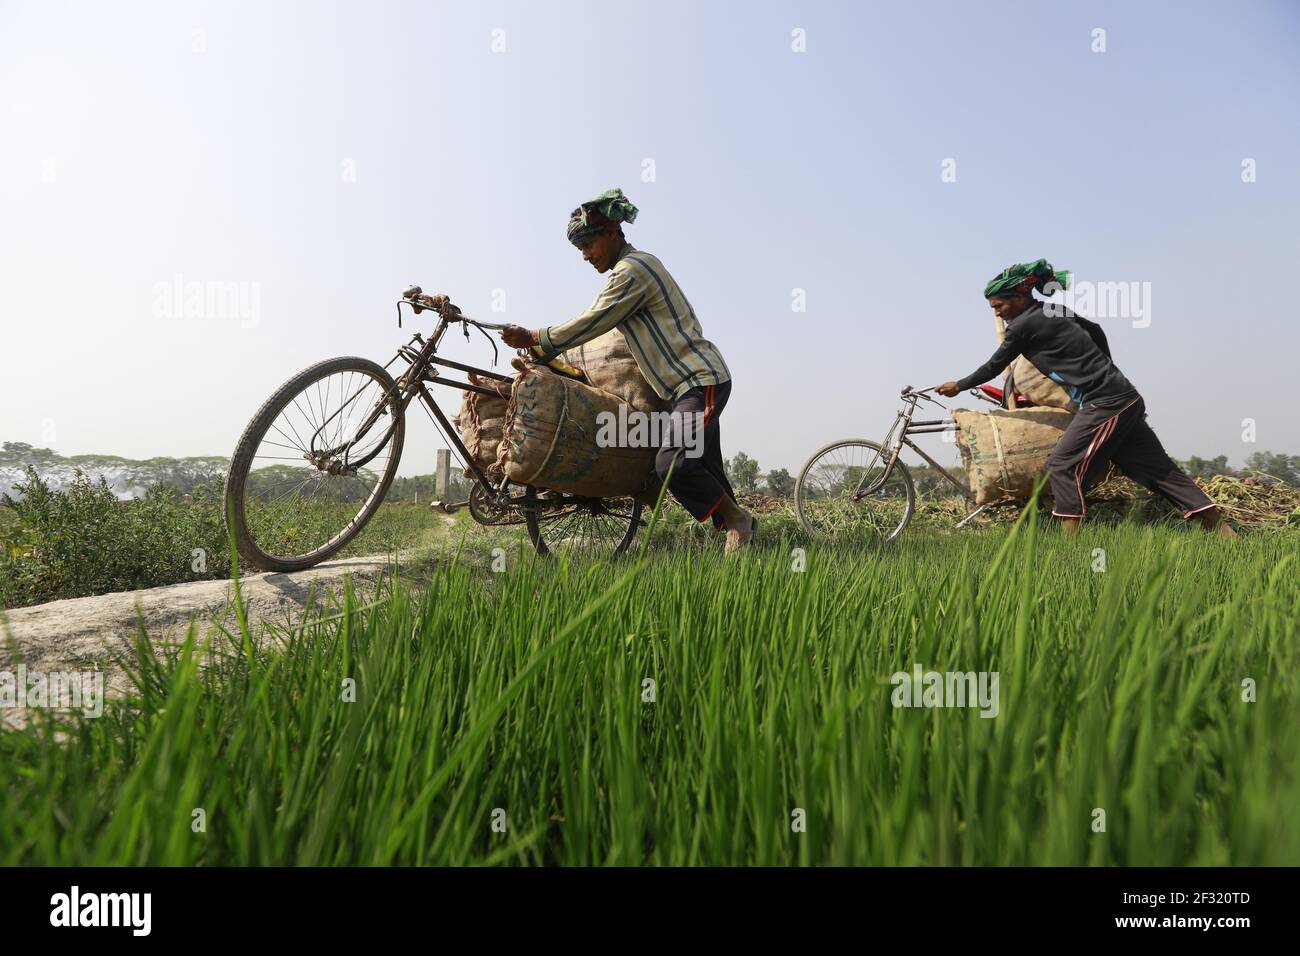 Bangladeshi farmers carry potato on their bicycles at a village in Munshiganj, near Dhaka, Bangladesh, March 14, 2021. As the winter season draws to an end, the farmers get busy harvesting potatoes from the fields. Following a bumper production of potatoes this year, the farmers are now waiting to get a fair price for their harvests. Photo by Suvra Kanti Das/ABACAPRESS.COM Stock Photo